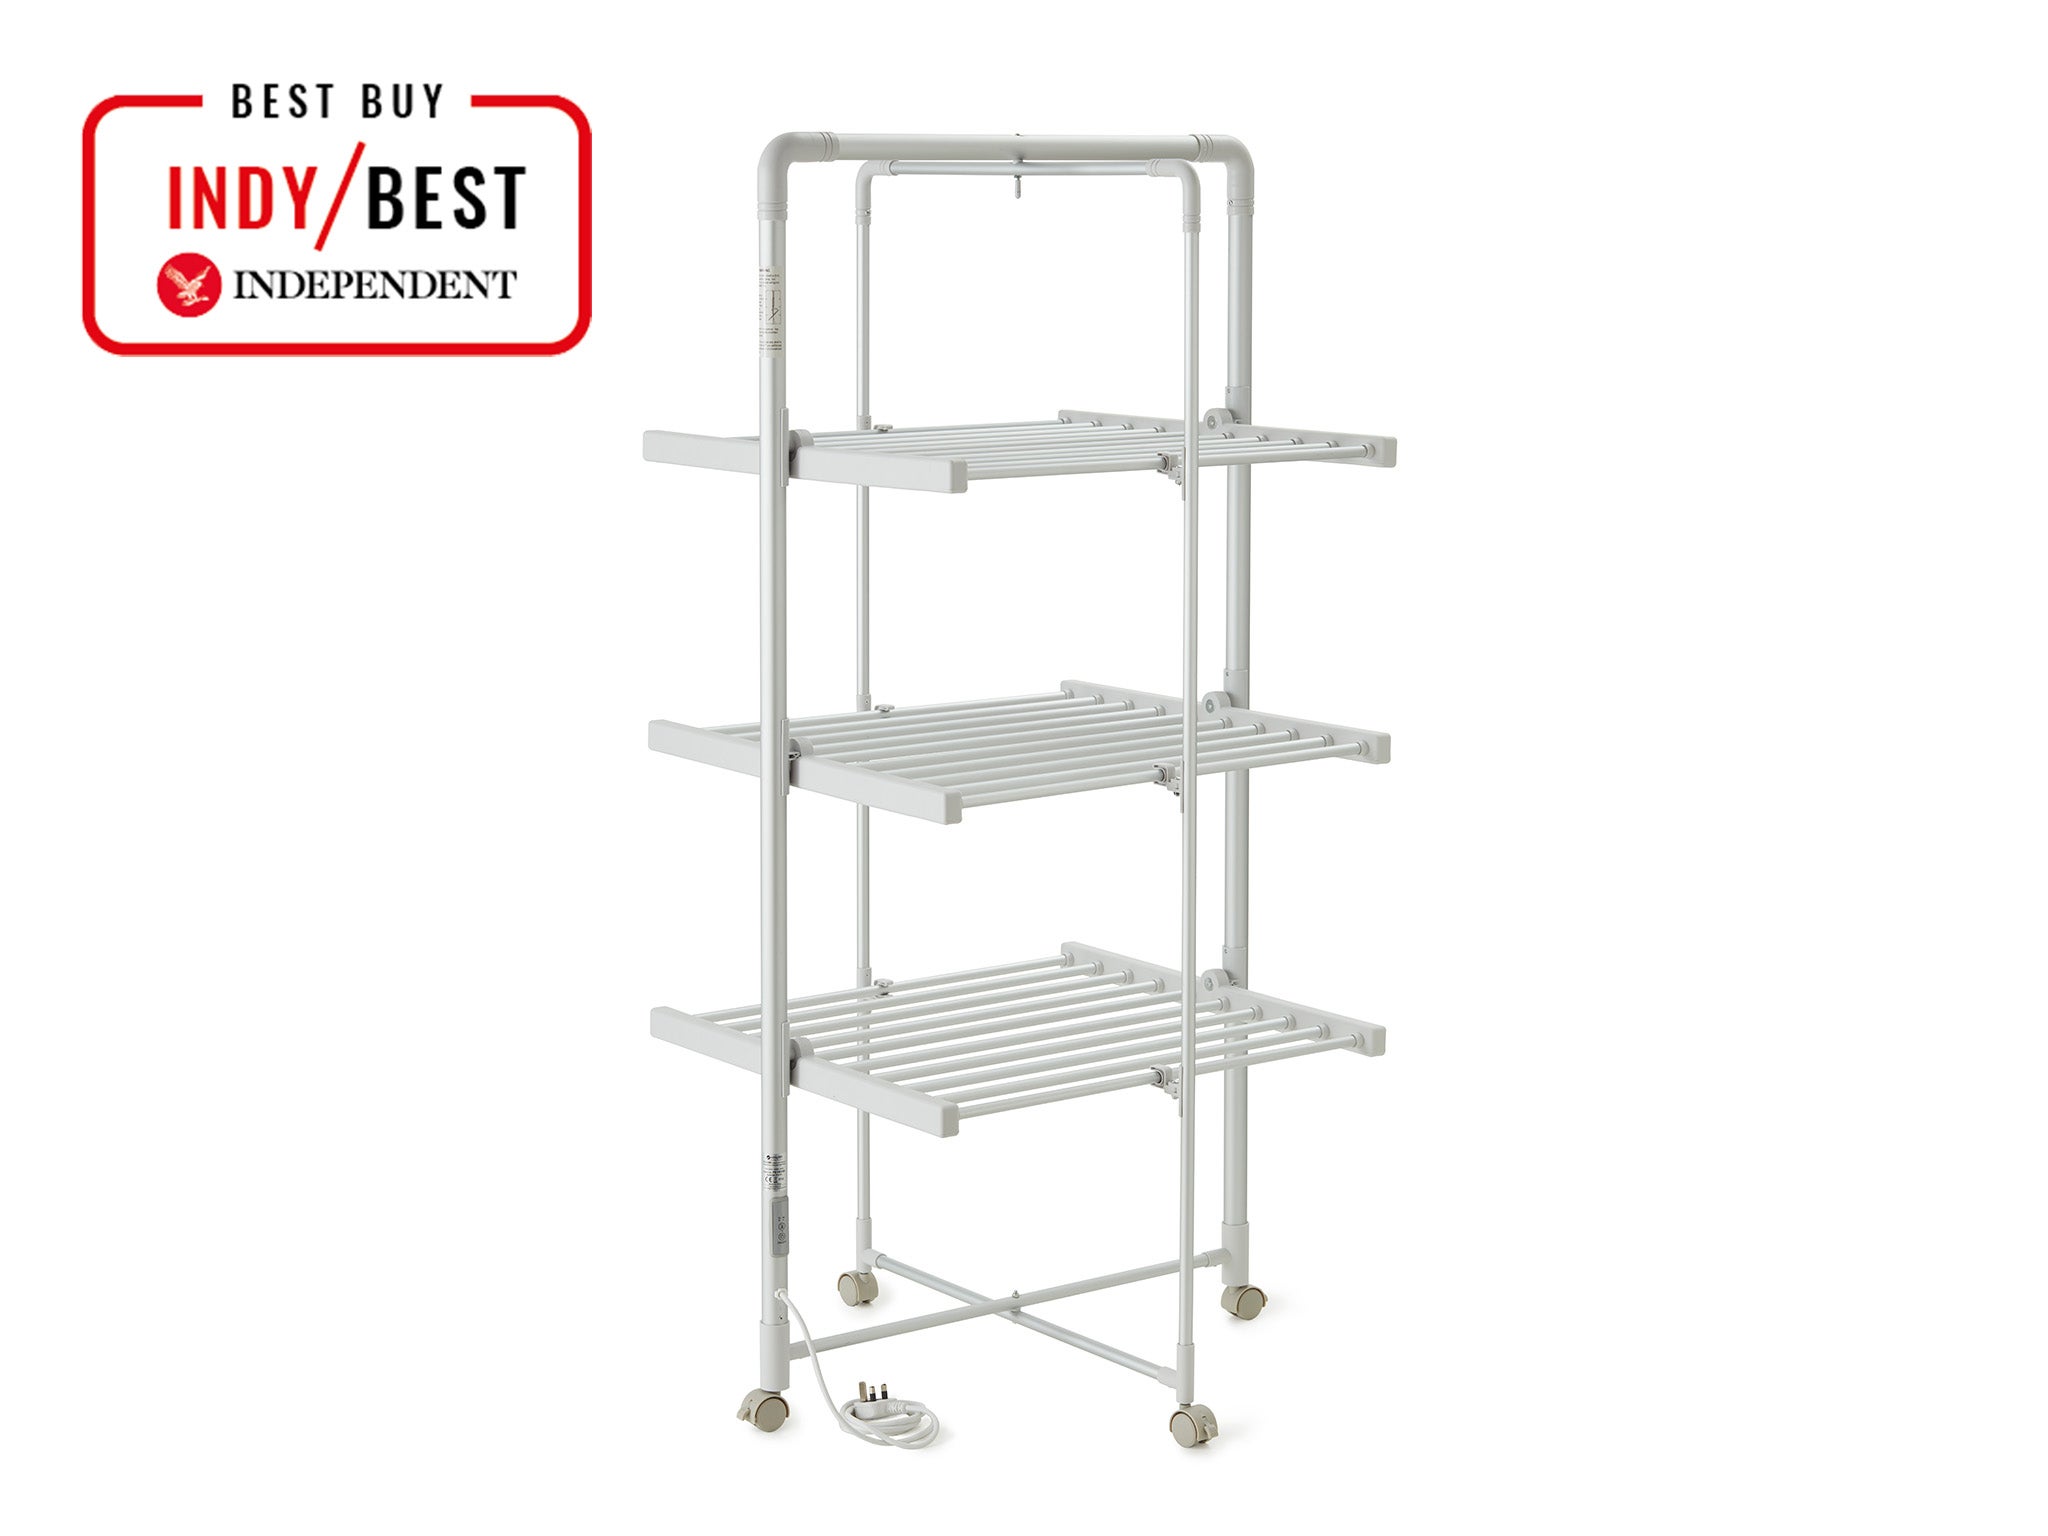 Easylife XL heated airer